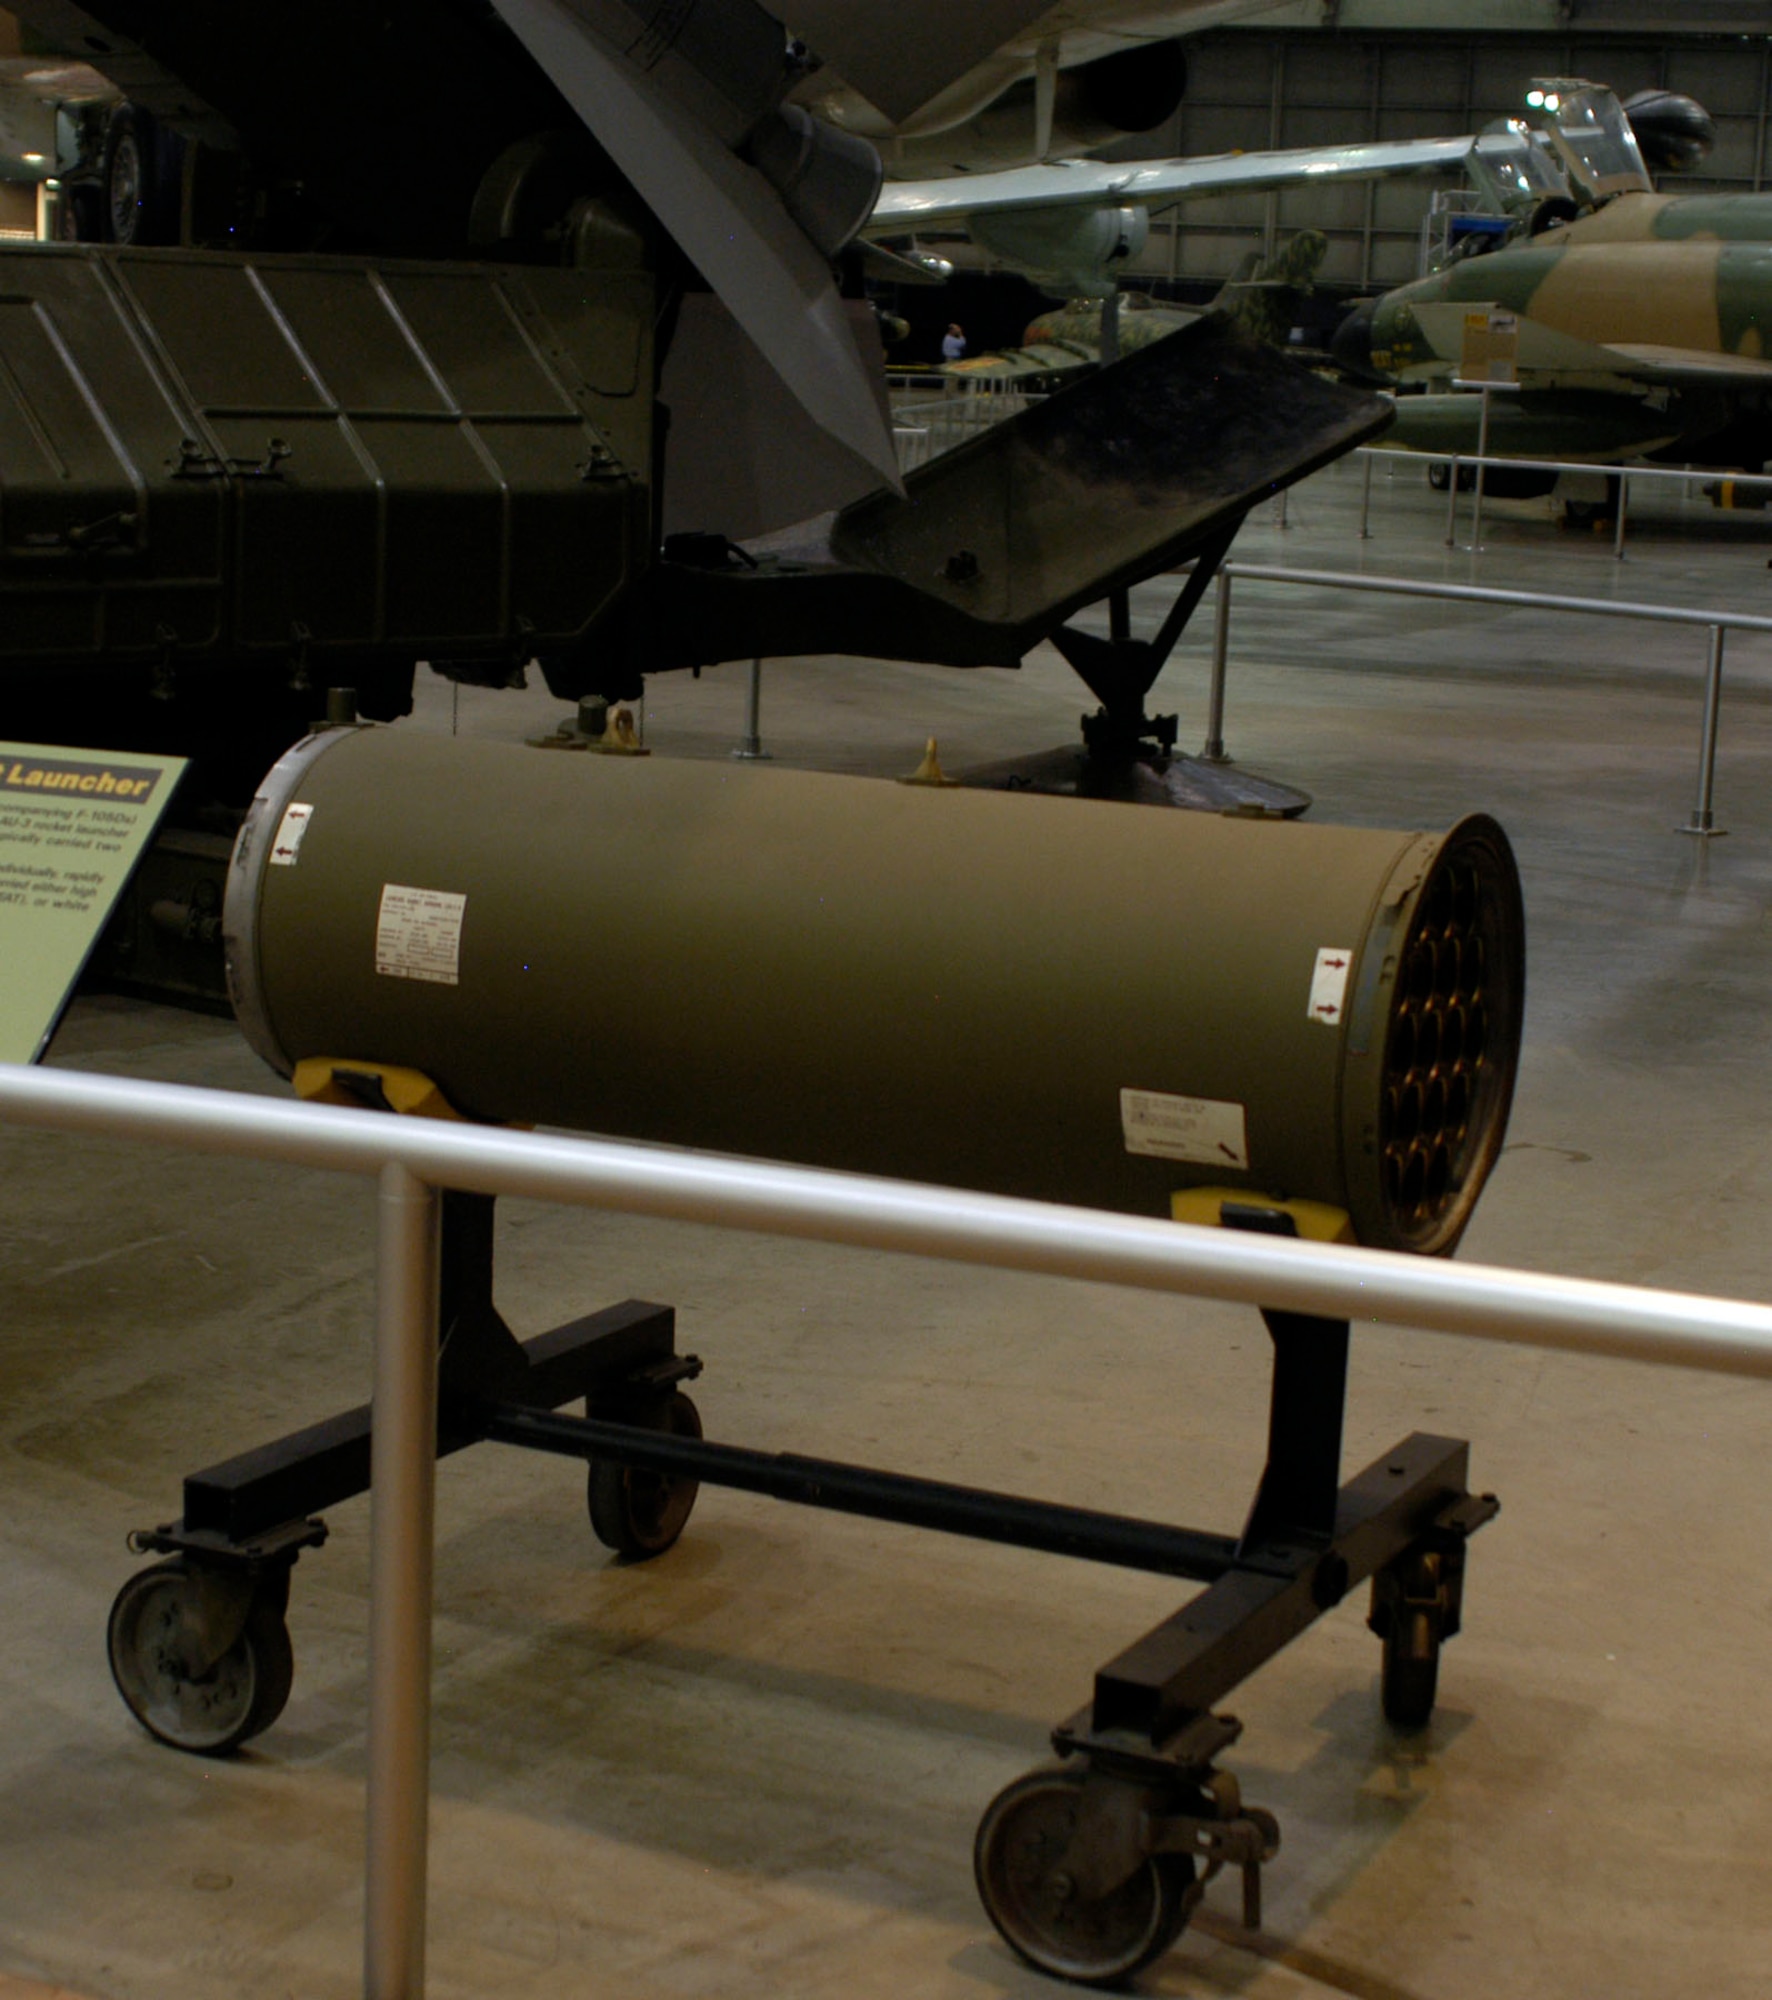 DAYTON, Ohio - The LAU-3 Rocket Launcher on display in the First In, Last Out: Wild Weasels vs. SAMs exhibit in the Southeast Asia War Gallery at the National Museum of the U.S. Air Force. (U.S. Air Force photo)